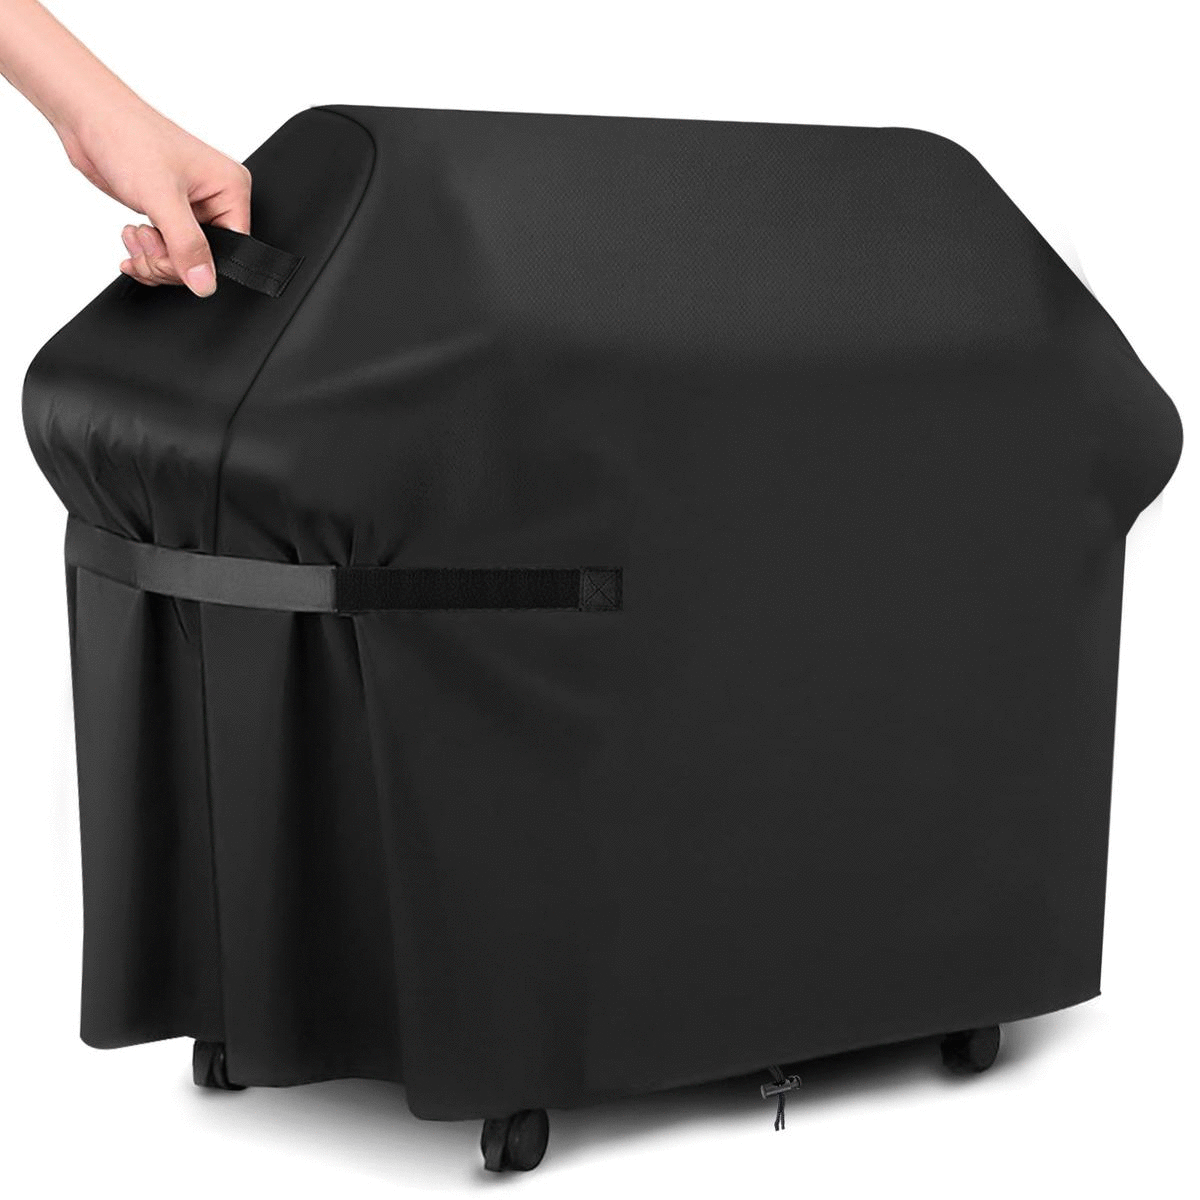 58"Heavy Duty Waterproof Gas Grill Cover fits Weber Char-Broil Coleman Gas Grill 